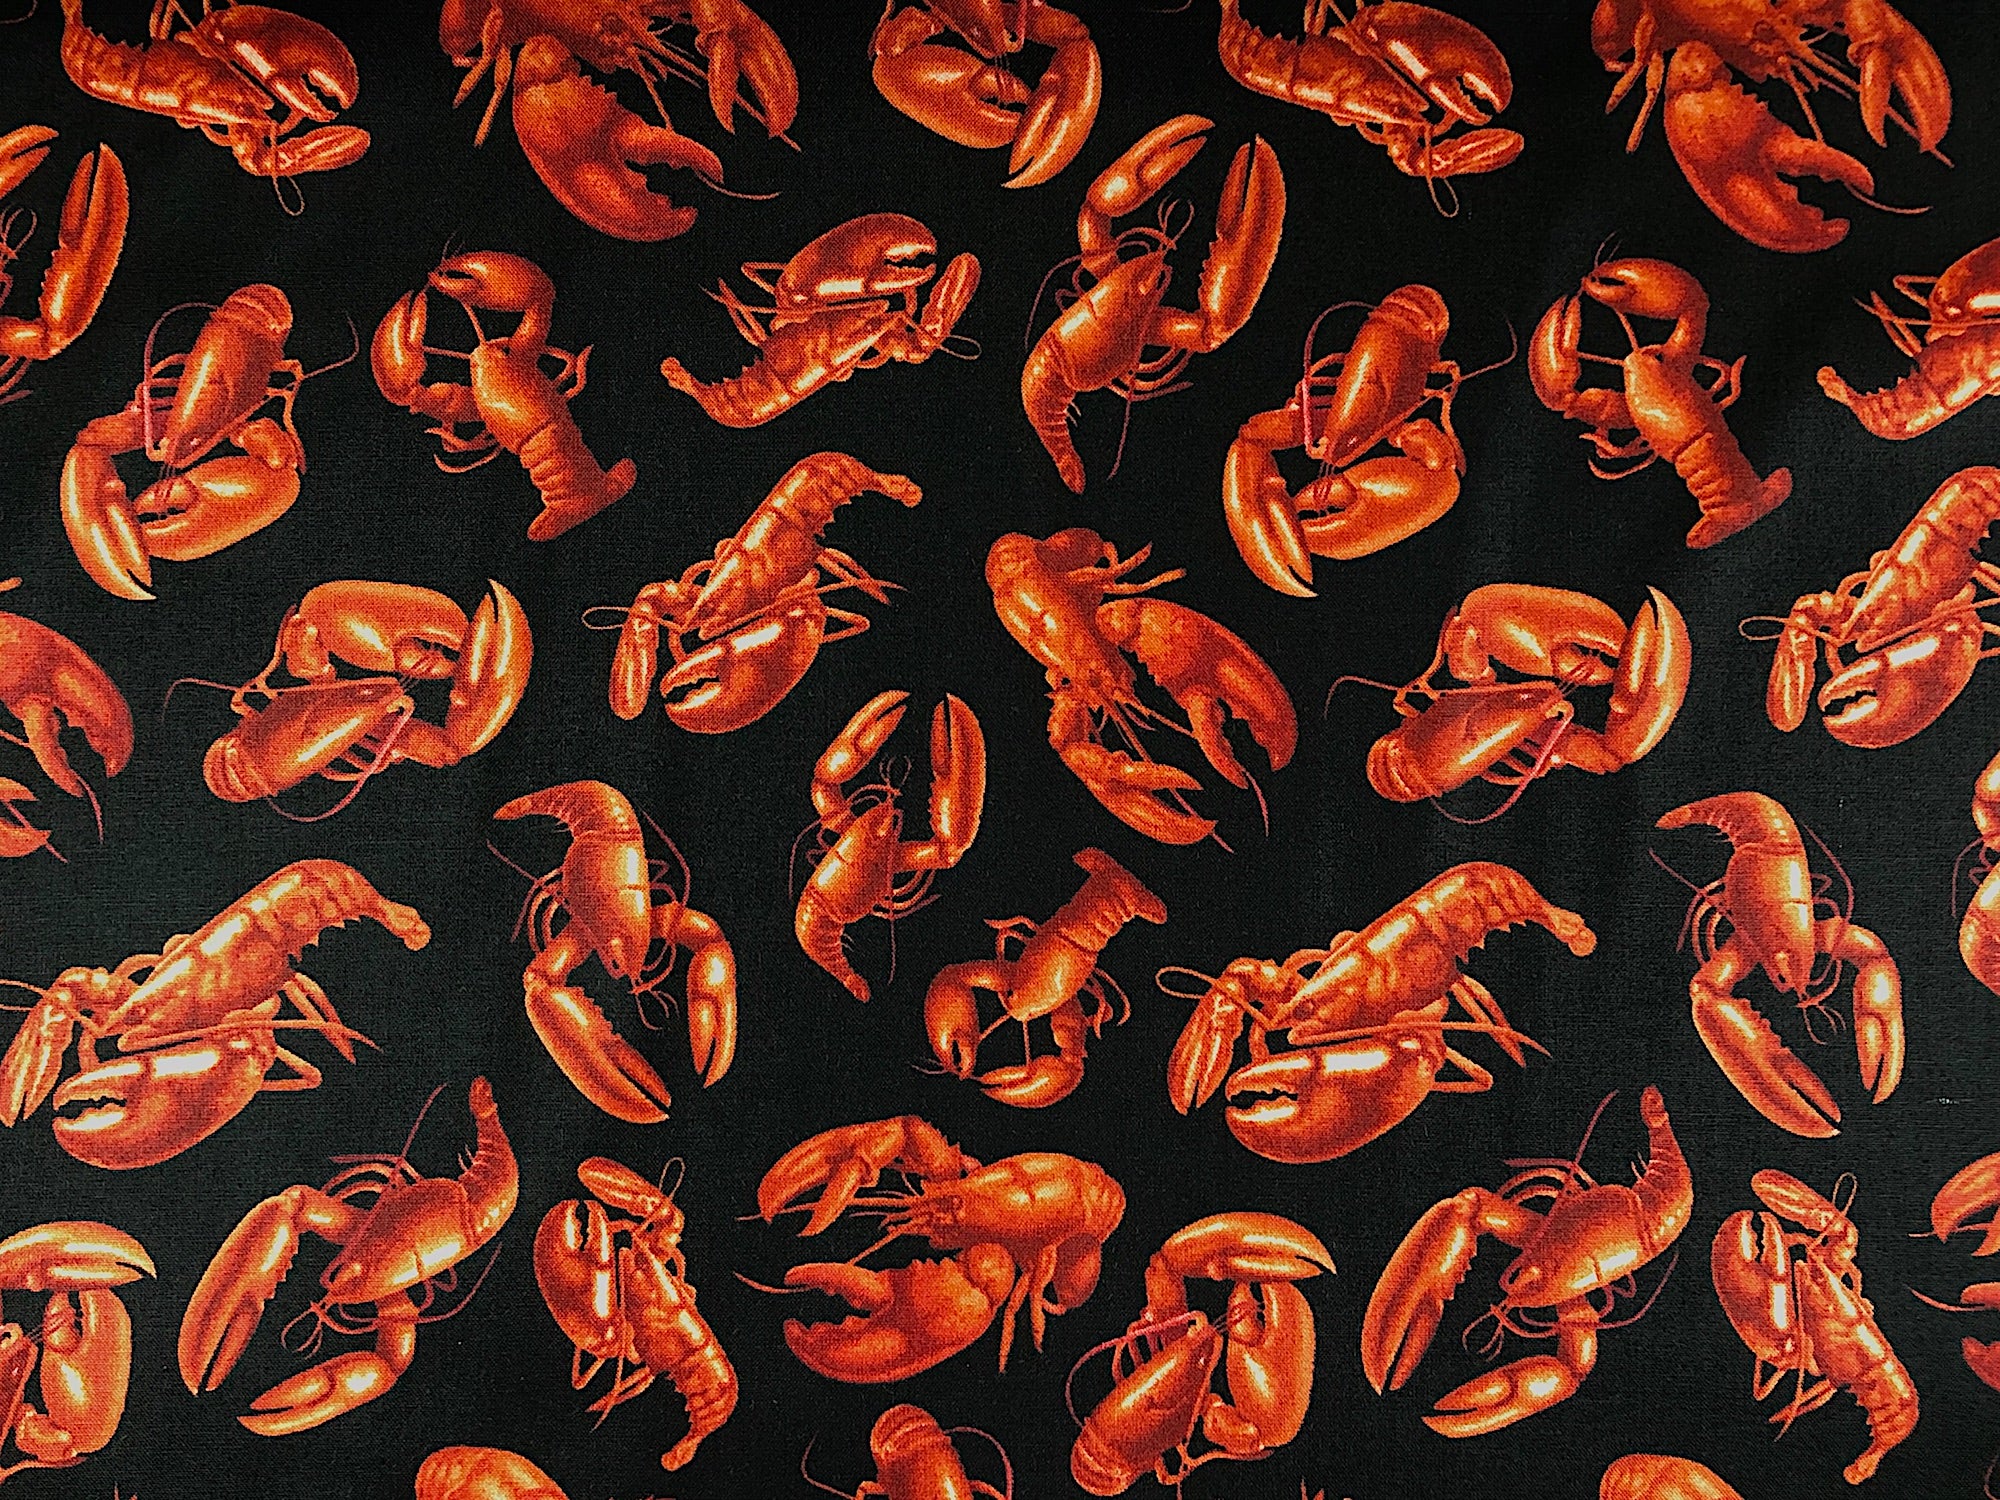 Black cotton fabric covered with red lobsters.